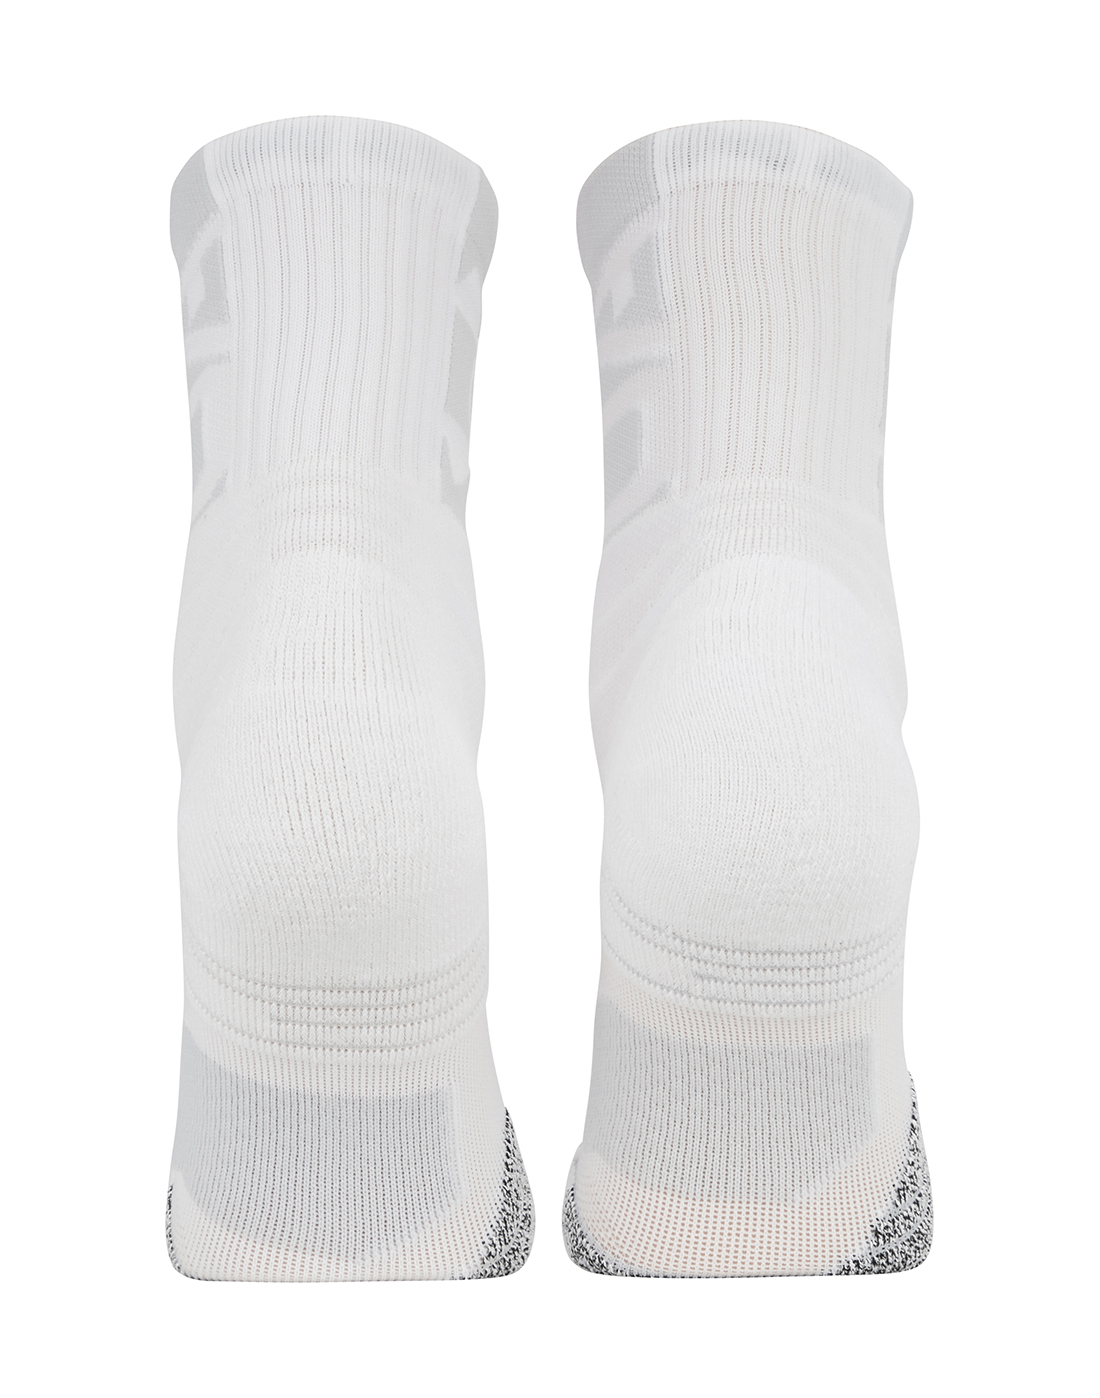 Under Armour Playmaker Crew Socks - White | Life Style Sports IE